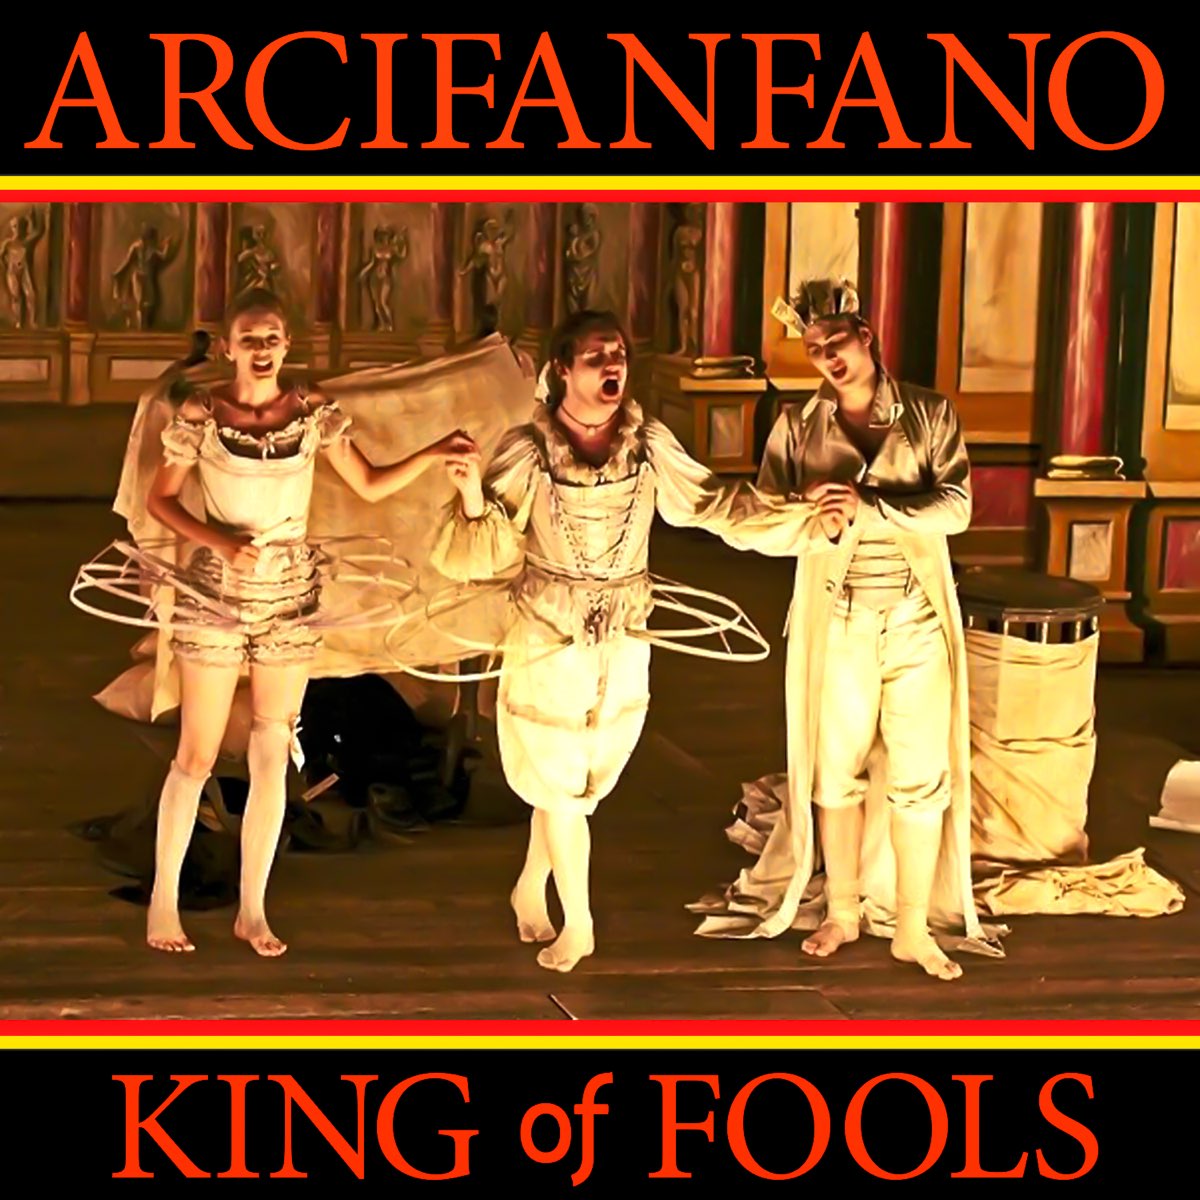 Act fool перевод. King of Fools 2004. The King and the Fool. King Tee Act a Fool. Listen to the King and the Fool Russian Rock.